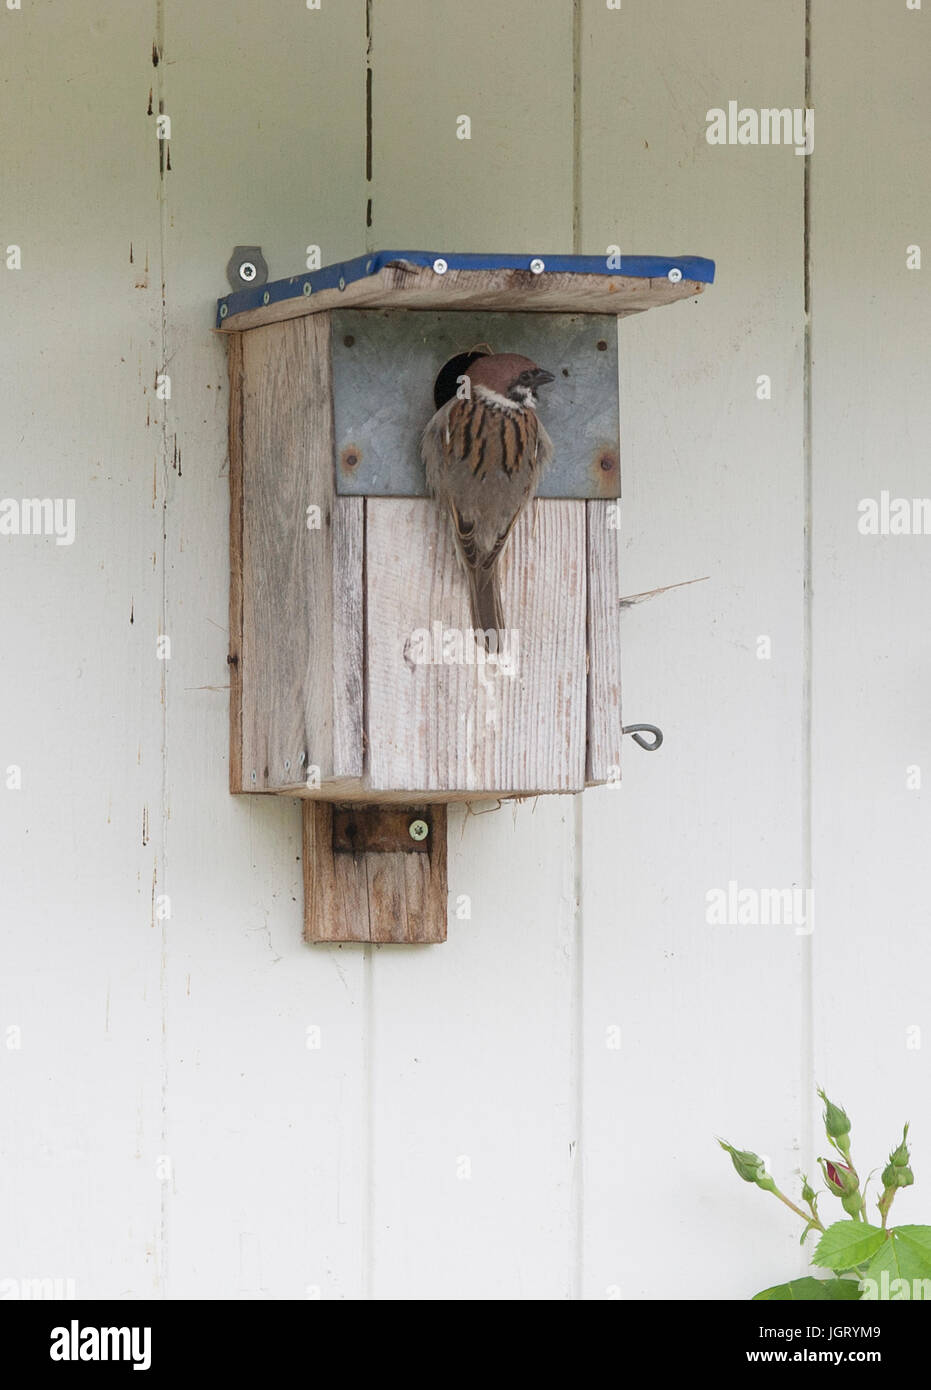 TREE SPARROW at her nest 2017 Stock Photo